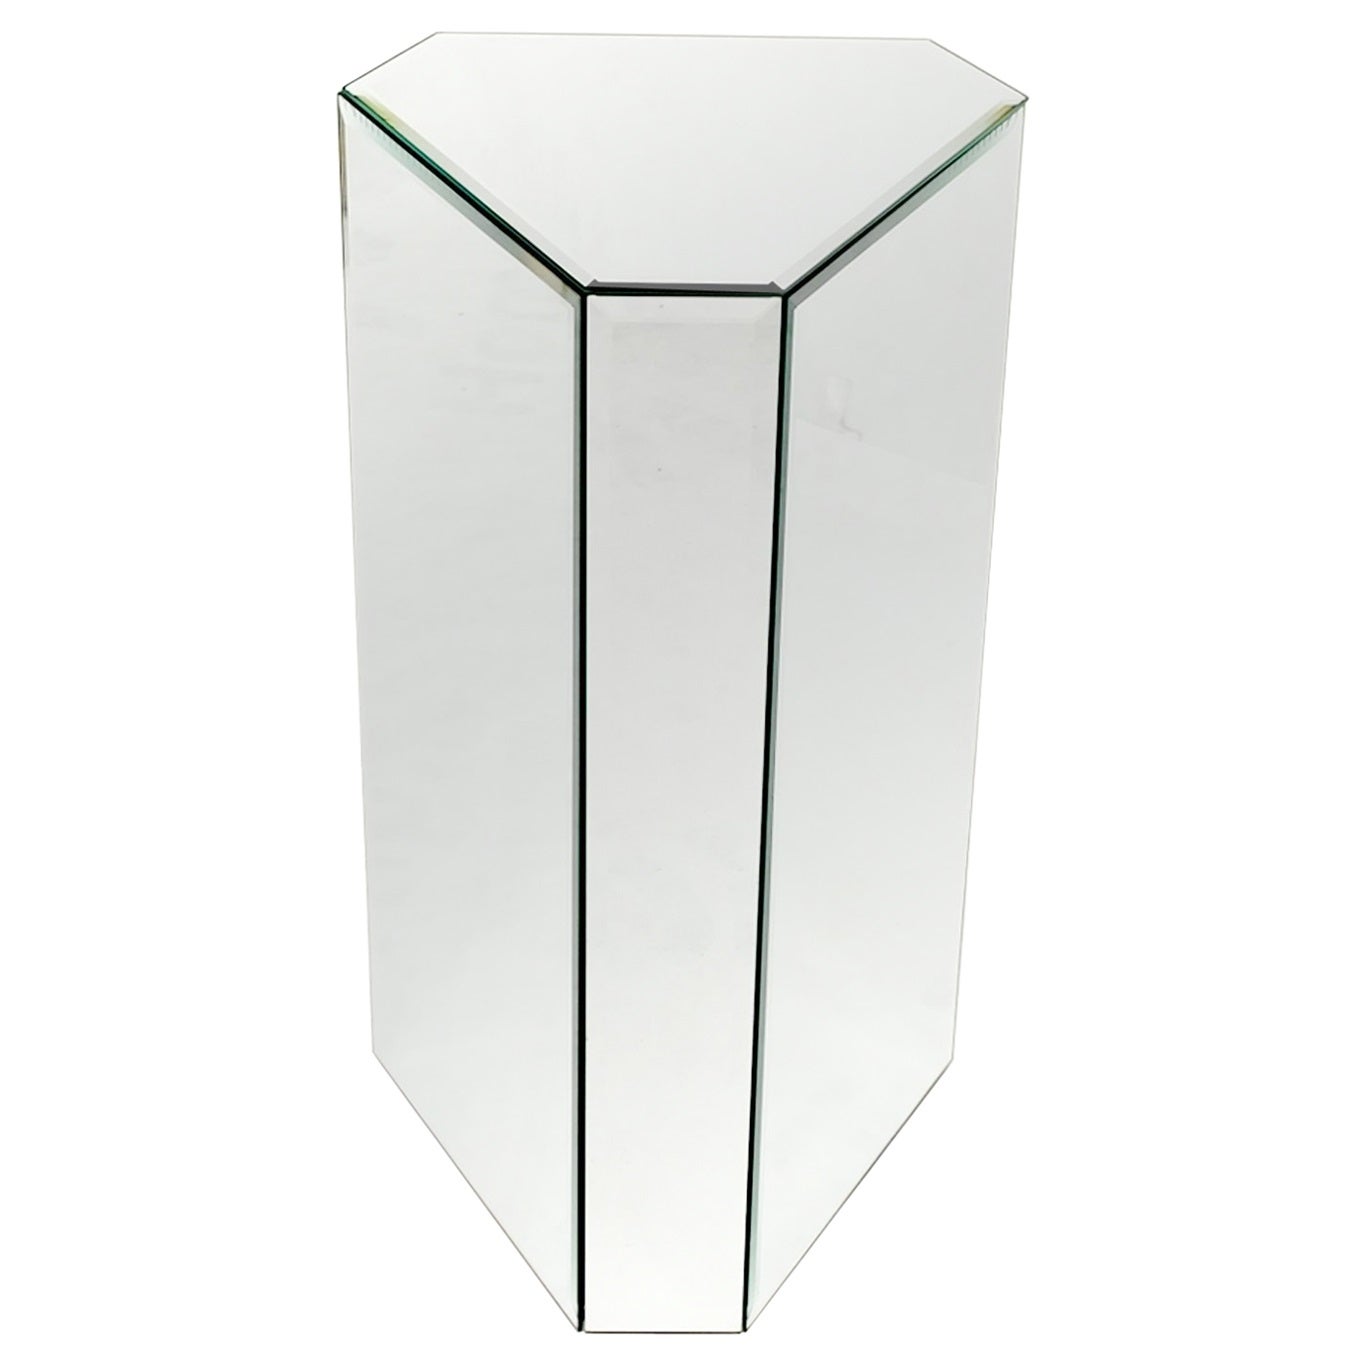 Mid Century Modern Triangular Beveled Mirrors Pedestal Stand End Table Console For Sale